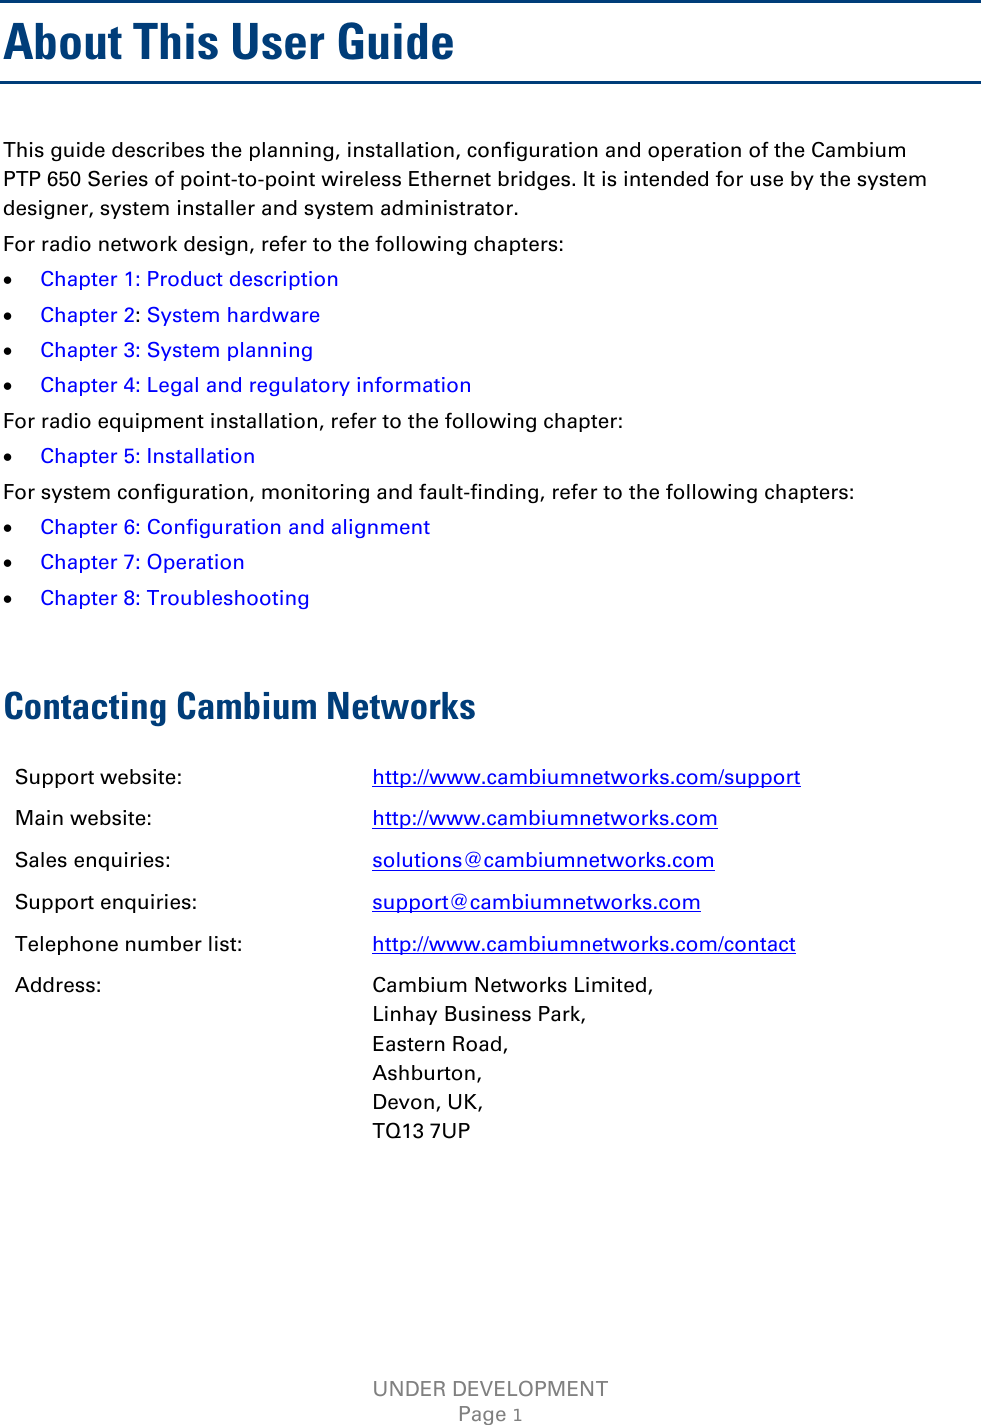  About This User Guide This guide describes the planning, installation, configuration and operation of the Cambium PTP 650 Series of point-to-point wireless Ethernet bridges. It is intended for use by the system designer, system installer and system administrator.  For radio network design, refer to the following chapters: • Chapter 1: Product description • Chapter 2: System hardware • Chapter 3: System planning • Chapter 4: Legal and regulatory information  For radio equipment installation, refer to the following chapter: • Chapter 5: Installation For system configuration, monitoring and fault-finding, refer to the following chapters: • Chapter 6: Configuration and alignment • Chapter 7: Operation • Chapter 8: Troubleshooting  Contacting Cambium Networks Support website:  http://www.cambiumnetworks.com/support Main website:  http://www.cambiumnetworks.com Sales enquiries:  solutions@cambiumnetworks.com Support enquiries:  support@cambiumnetworks.com Telephone number list: http://www.cambiumnetworks.com/contact Address:  Cambium Networks Limited, Linhay Business Park, Eastern Road, Ashburton, Devon, UK, TQ13 7UP UNDER DEVELOPMENT Page 1 